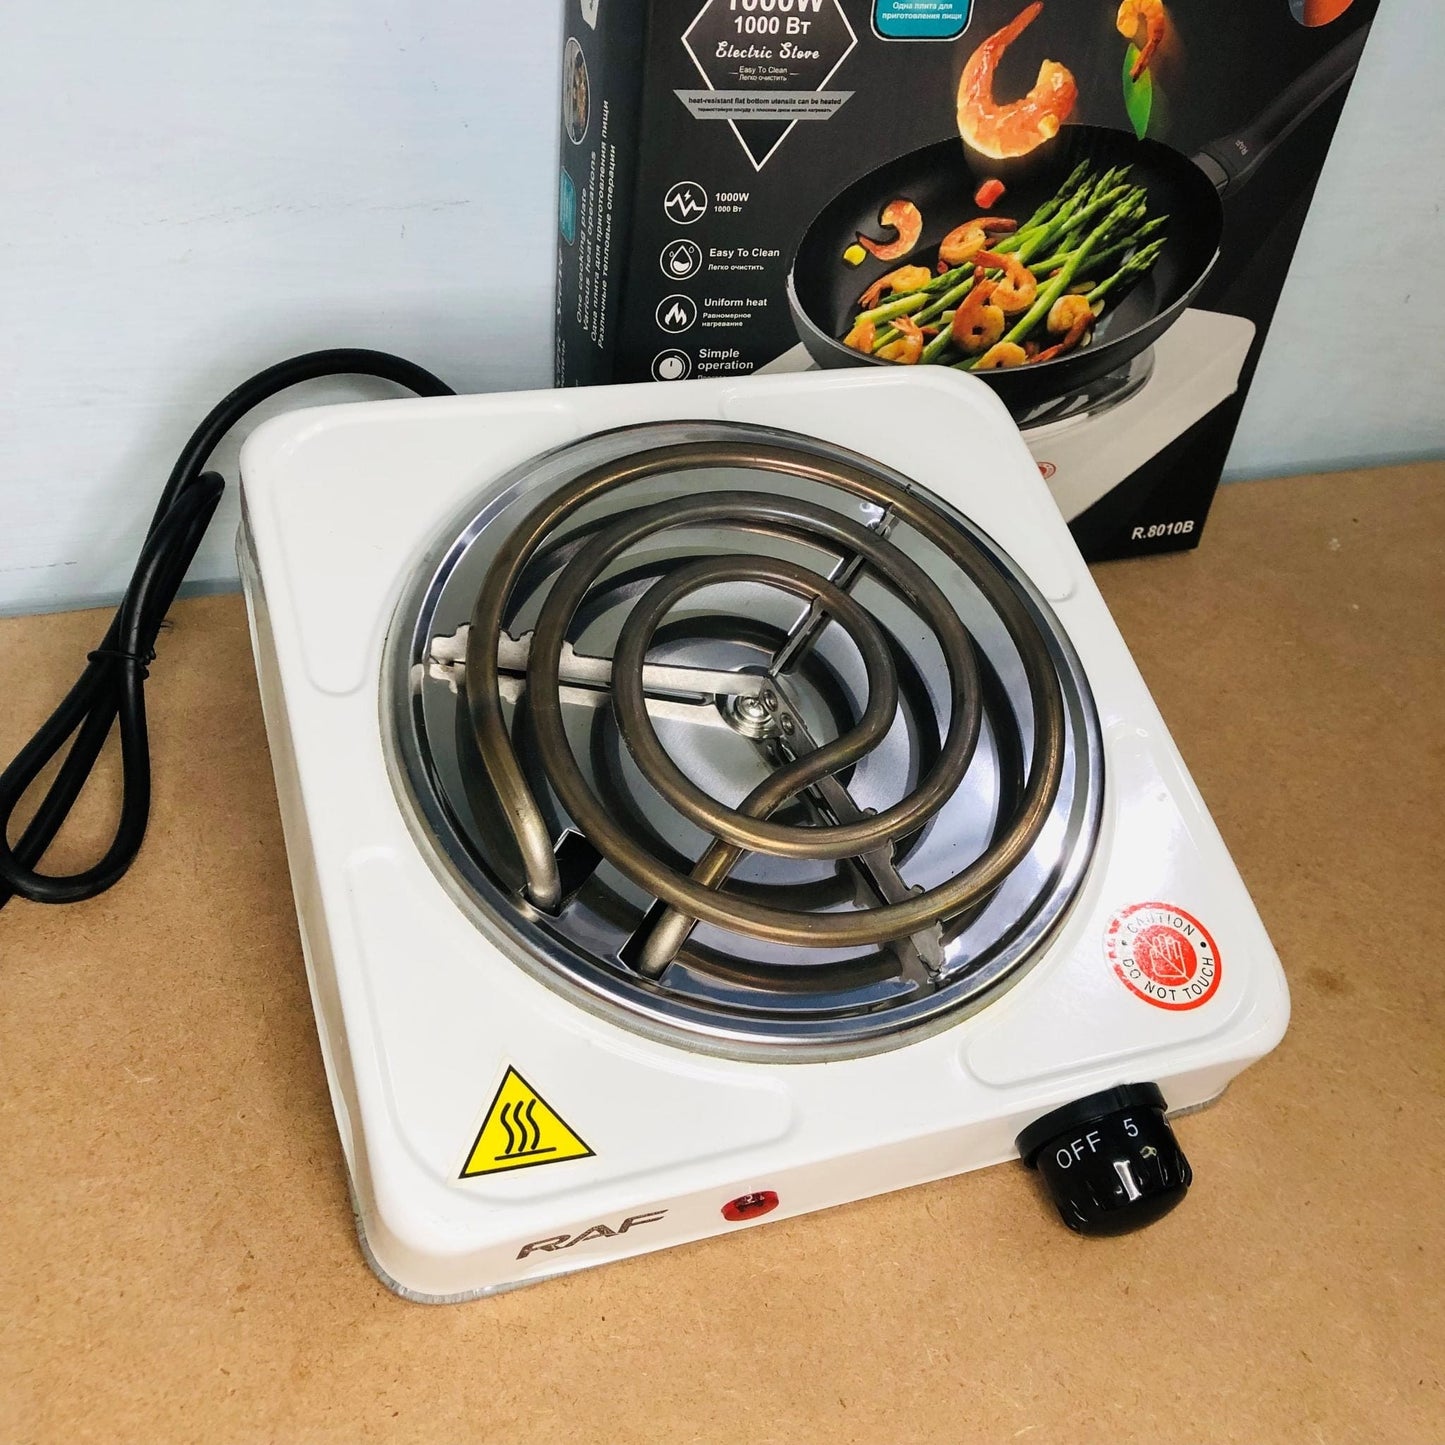 Electric Stove For Cooking – Hot Plate Heat Up In Just 2 Mins – Easy To Clean – (random Color ).